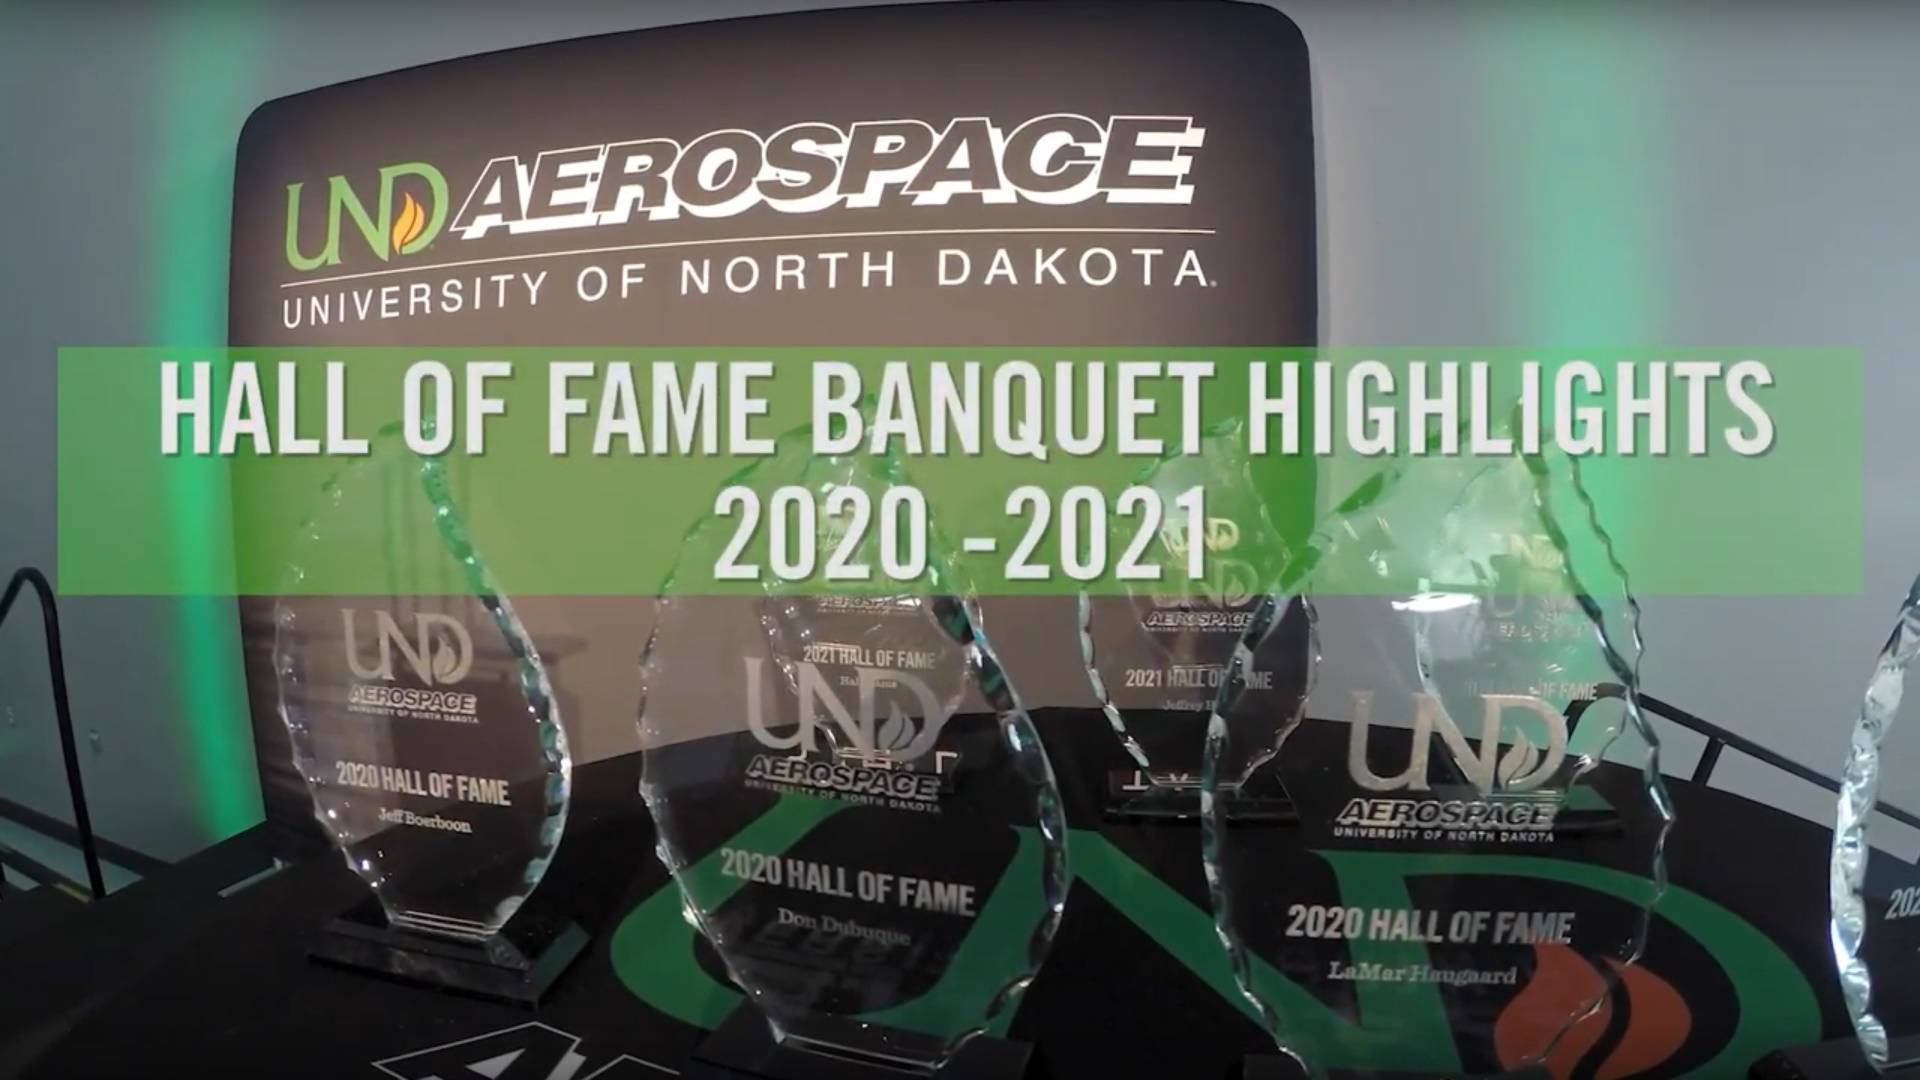 Hall of Fame Banquet Highlights 2020-2021